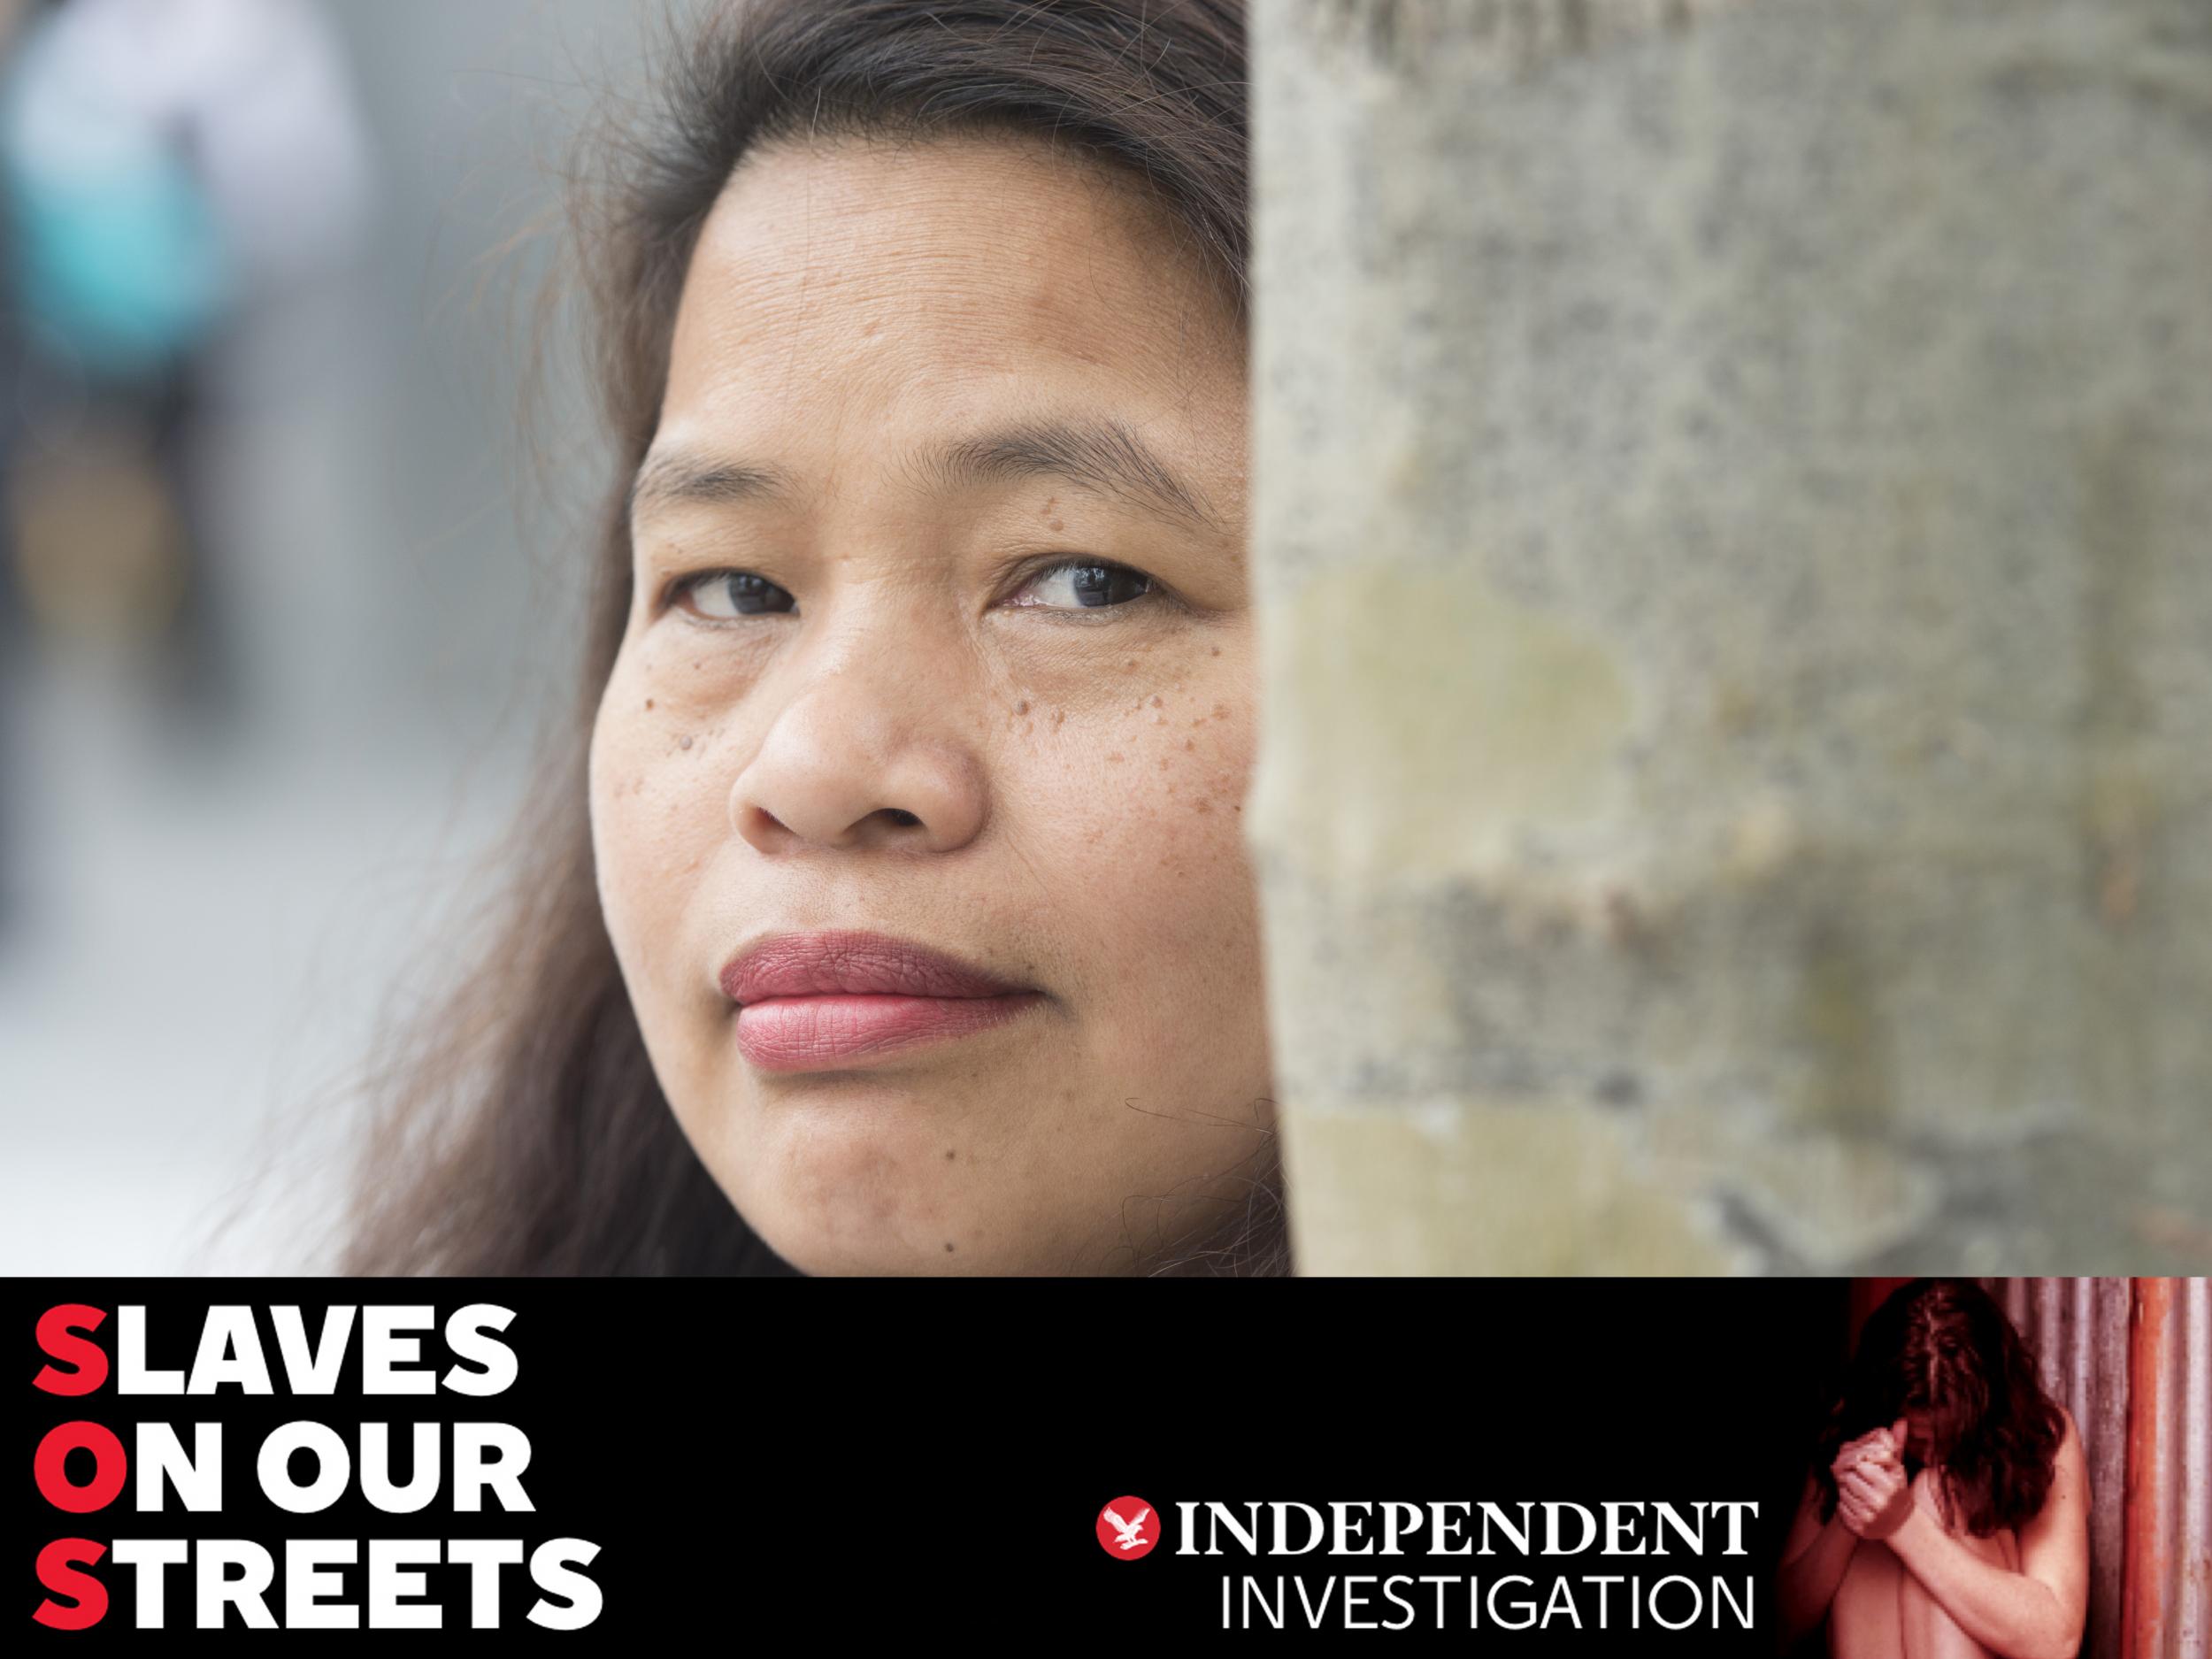 Marissa Begonia, who founded The Voice of Domestic Workers charity